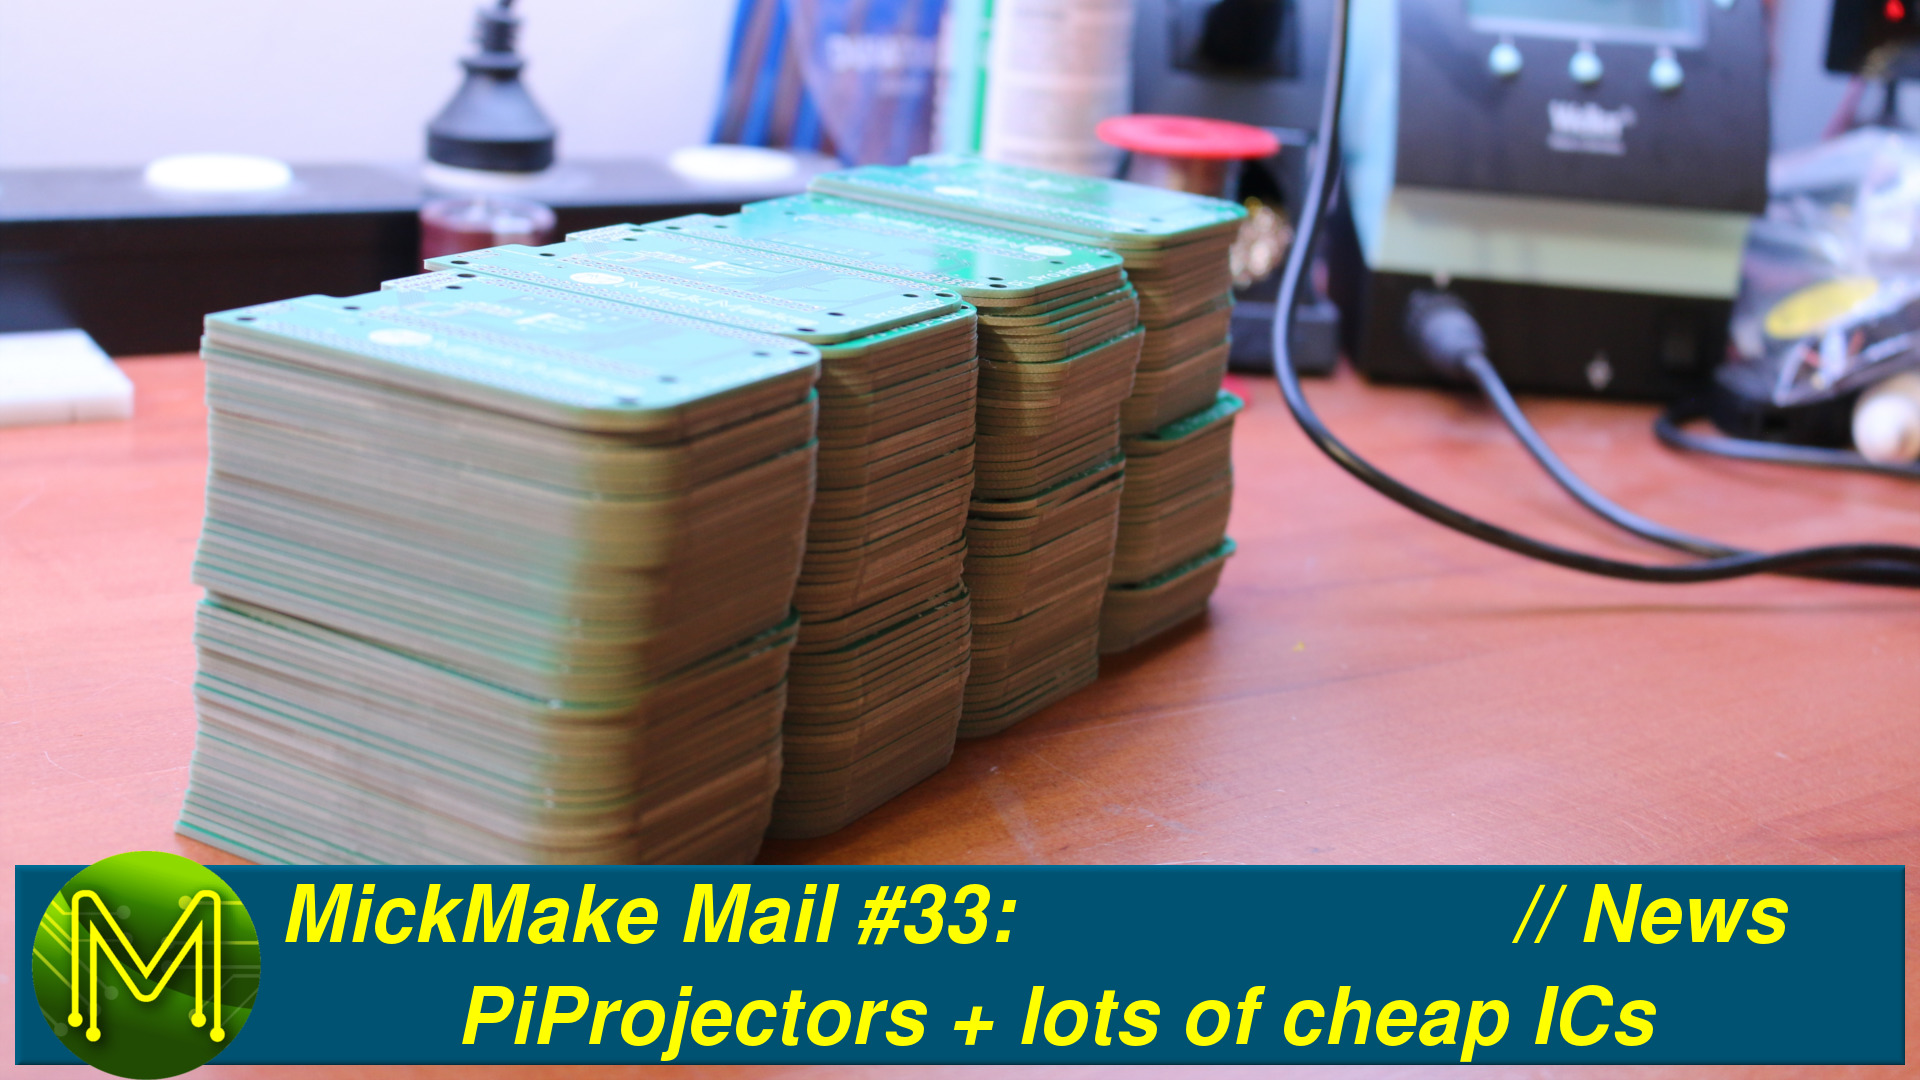 MickMake Mail #33: PiProjectors plus lots of cheap ICs.